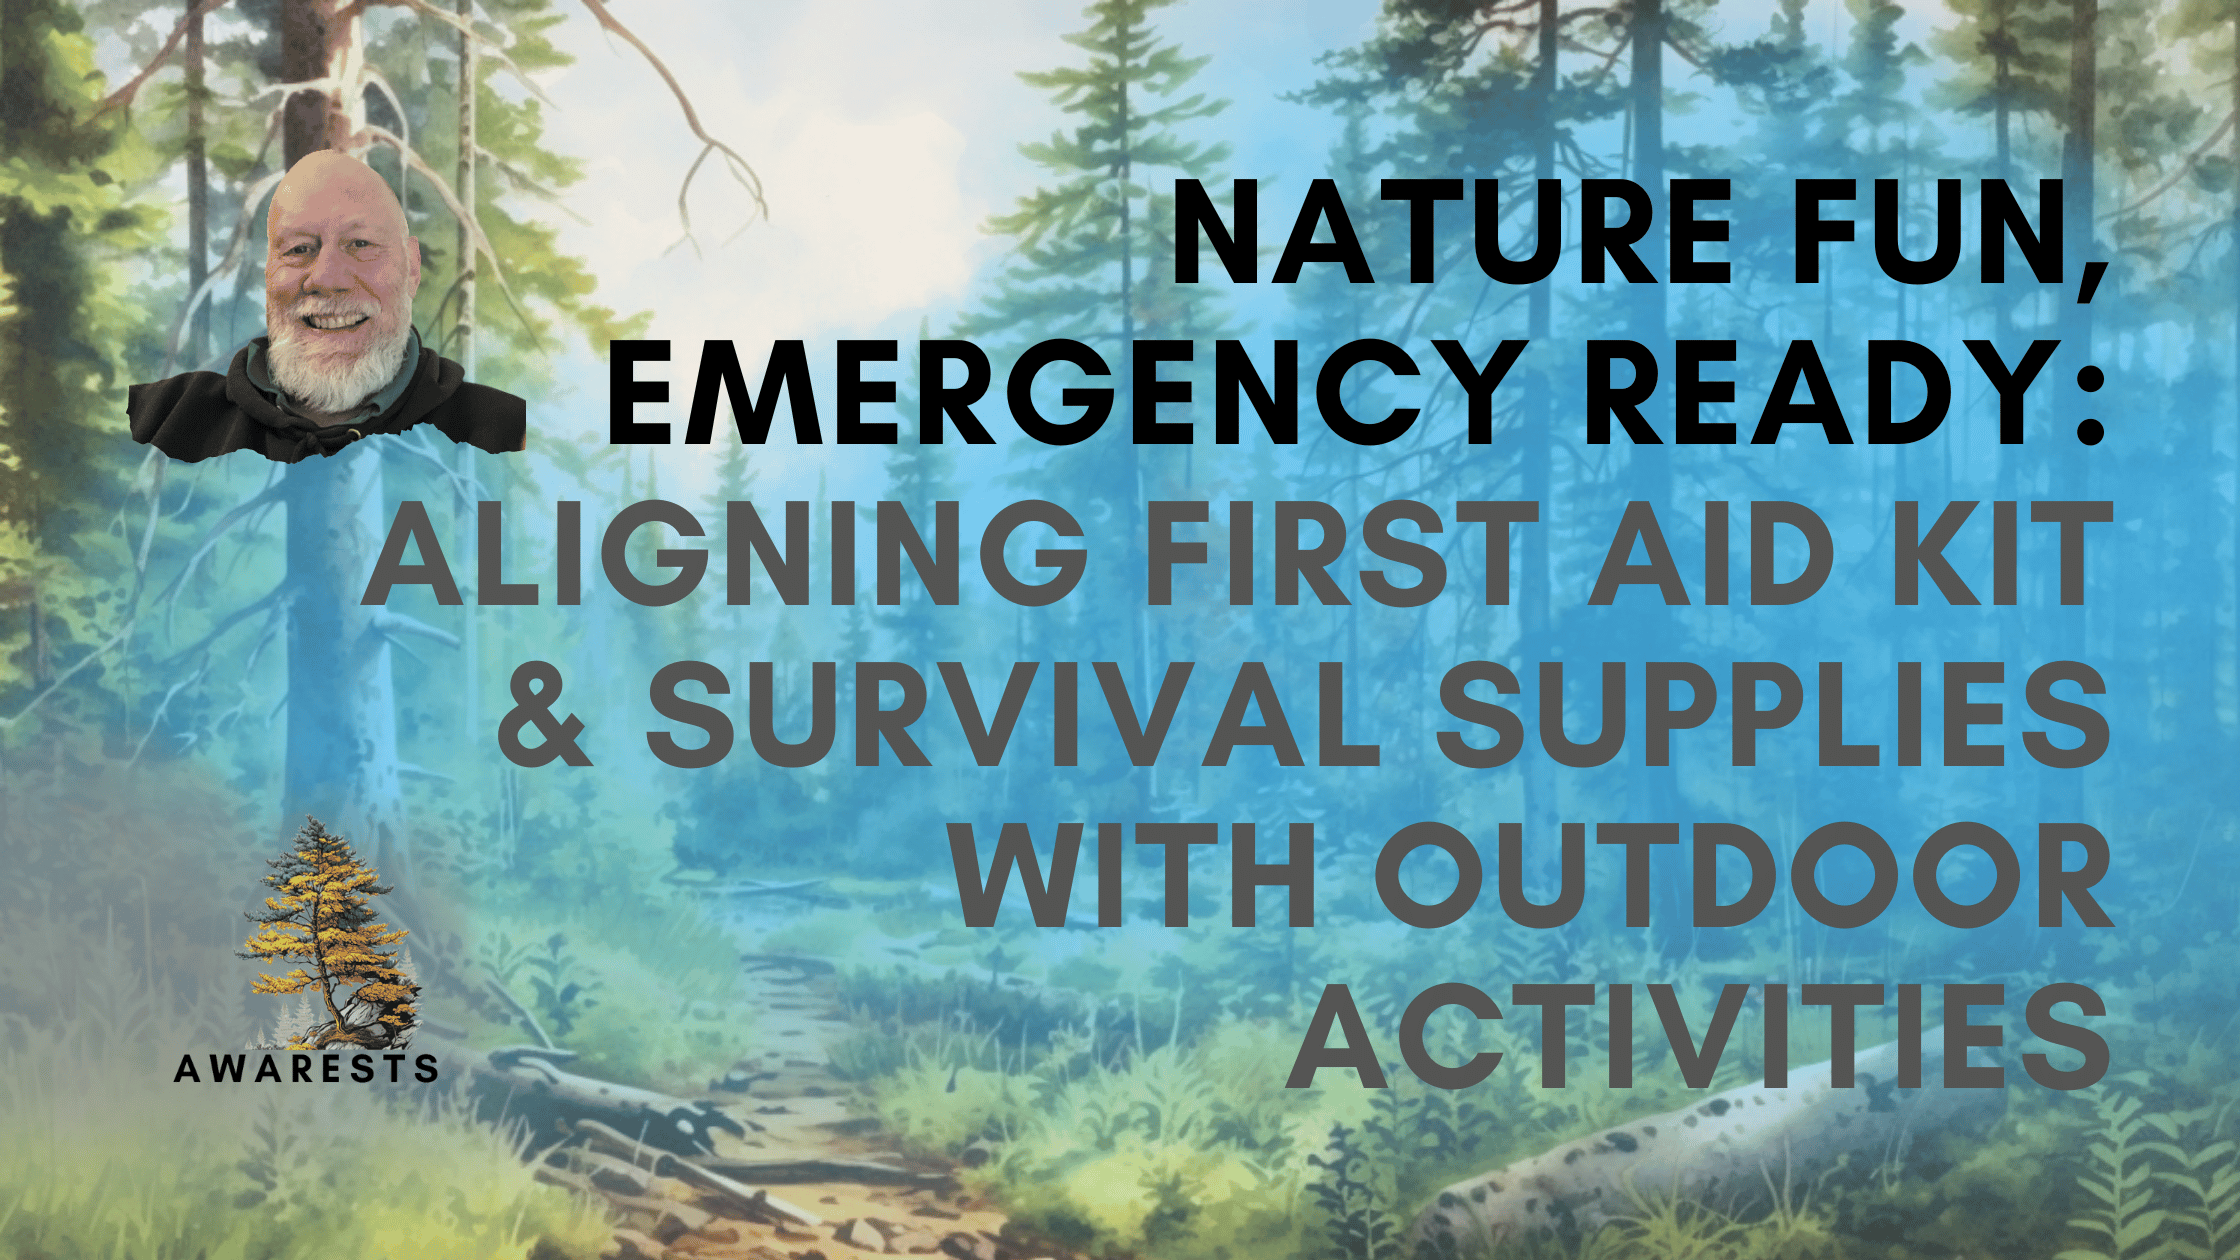 Nature Fun, Emergency Ready: Aligning First Aid Kit and Survival Supplies with Outdoor Activities